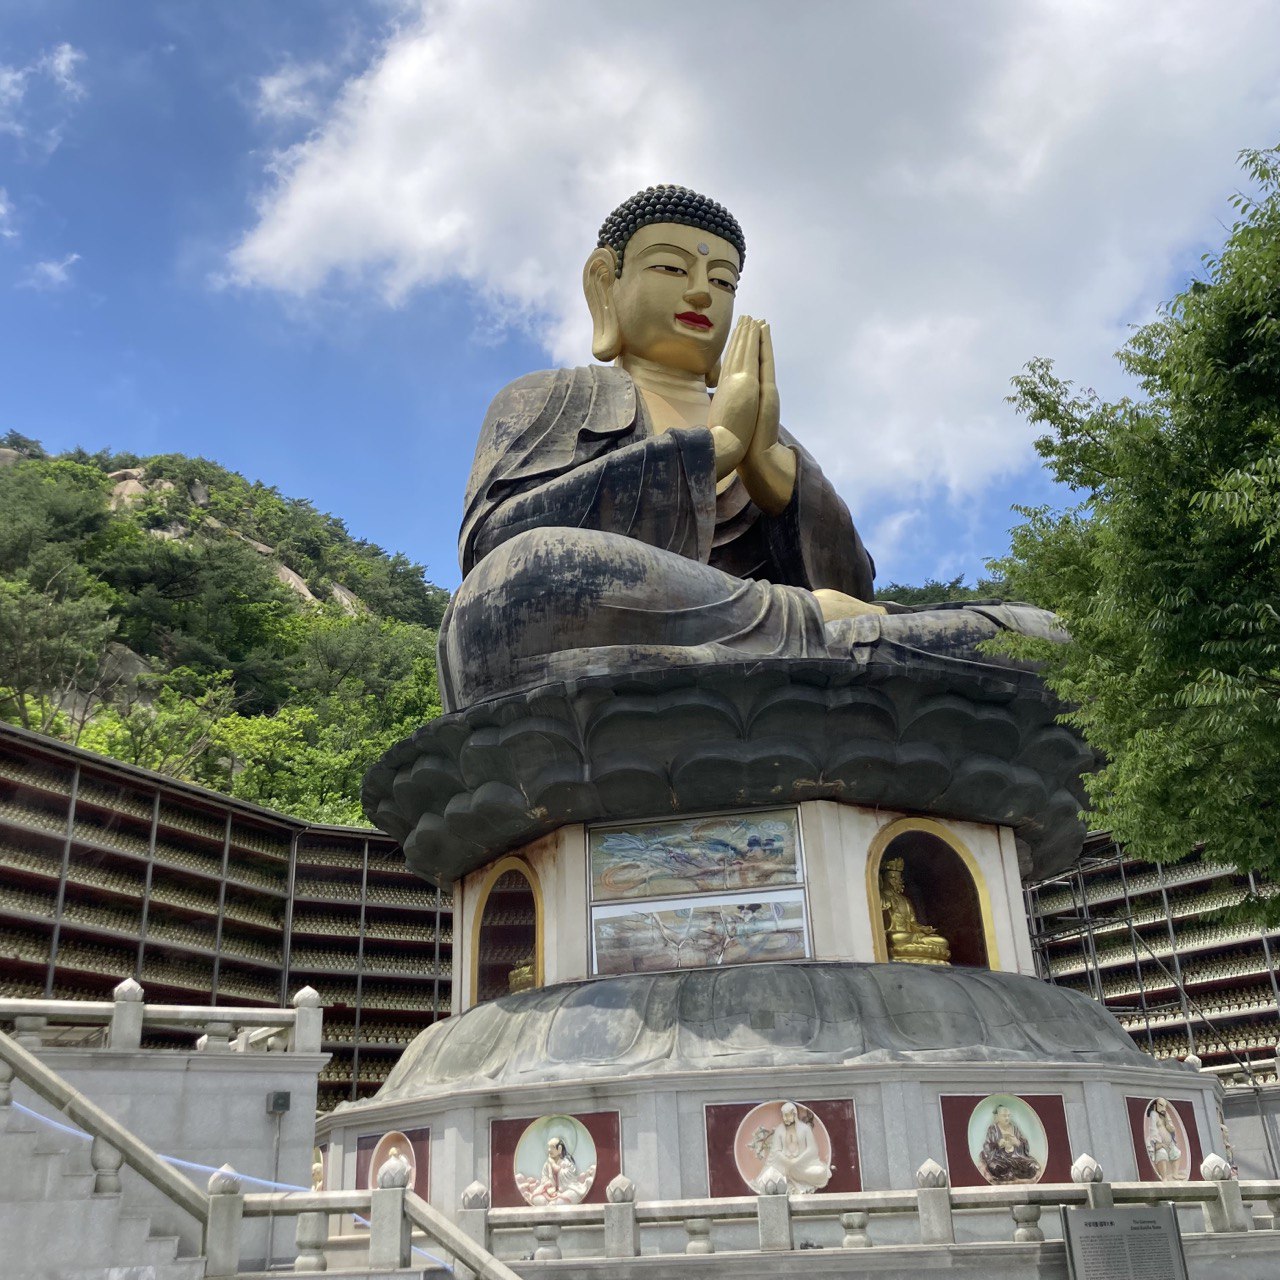 This Buddha is the largest in East Asia, casually found in one the trails close to Uisanbong.